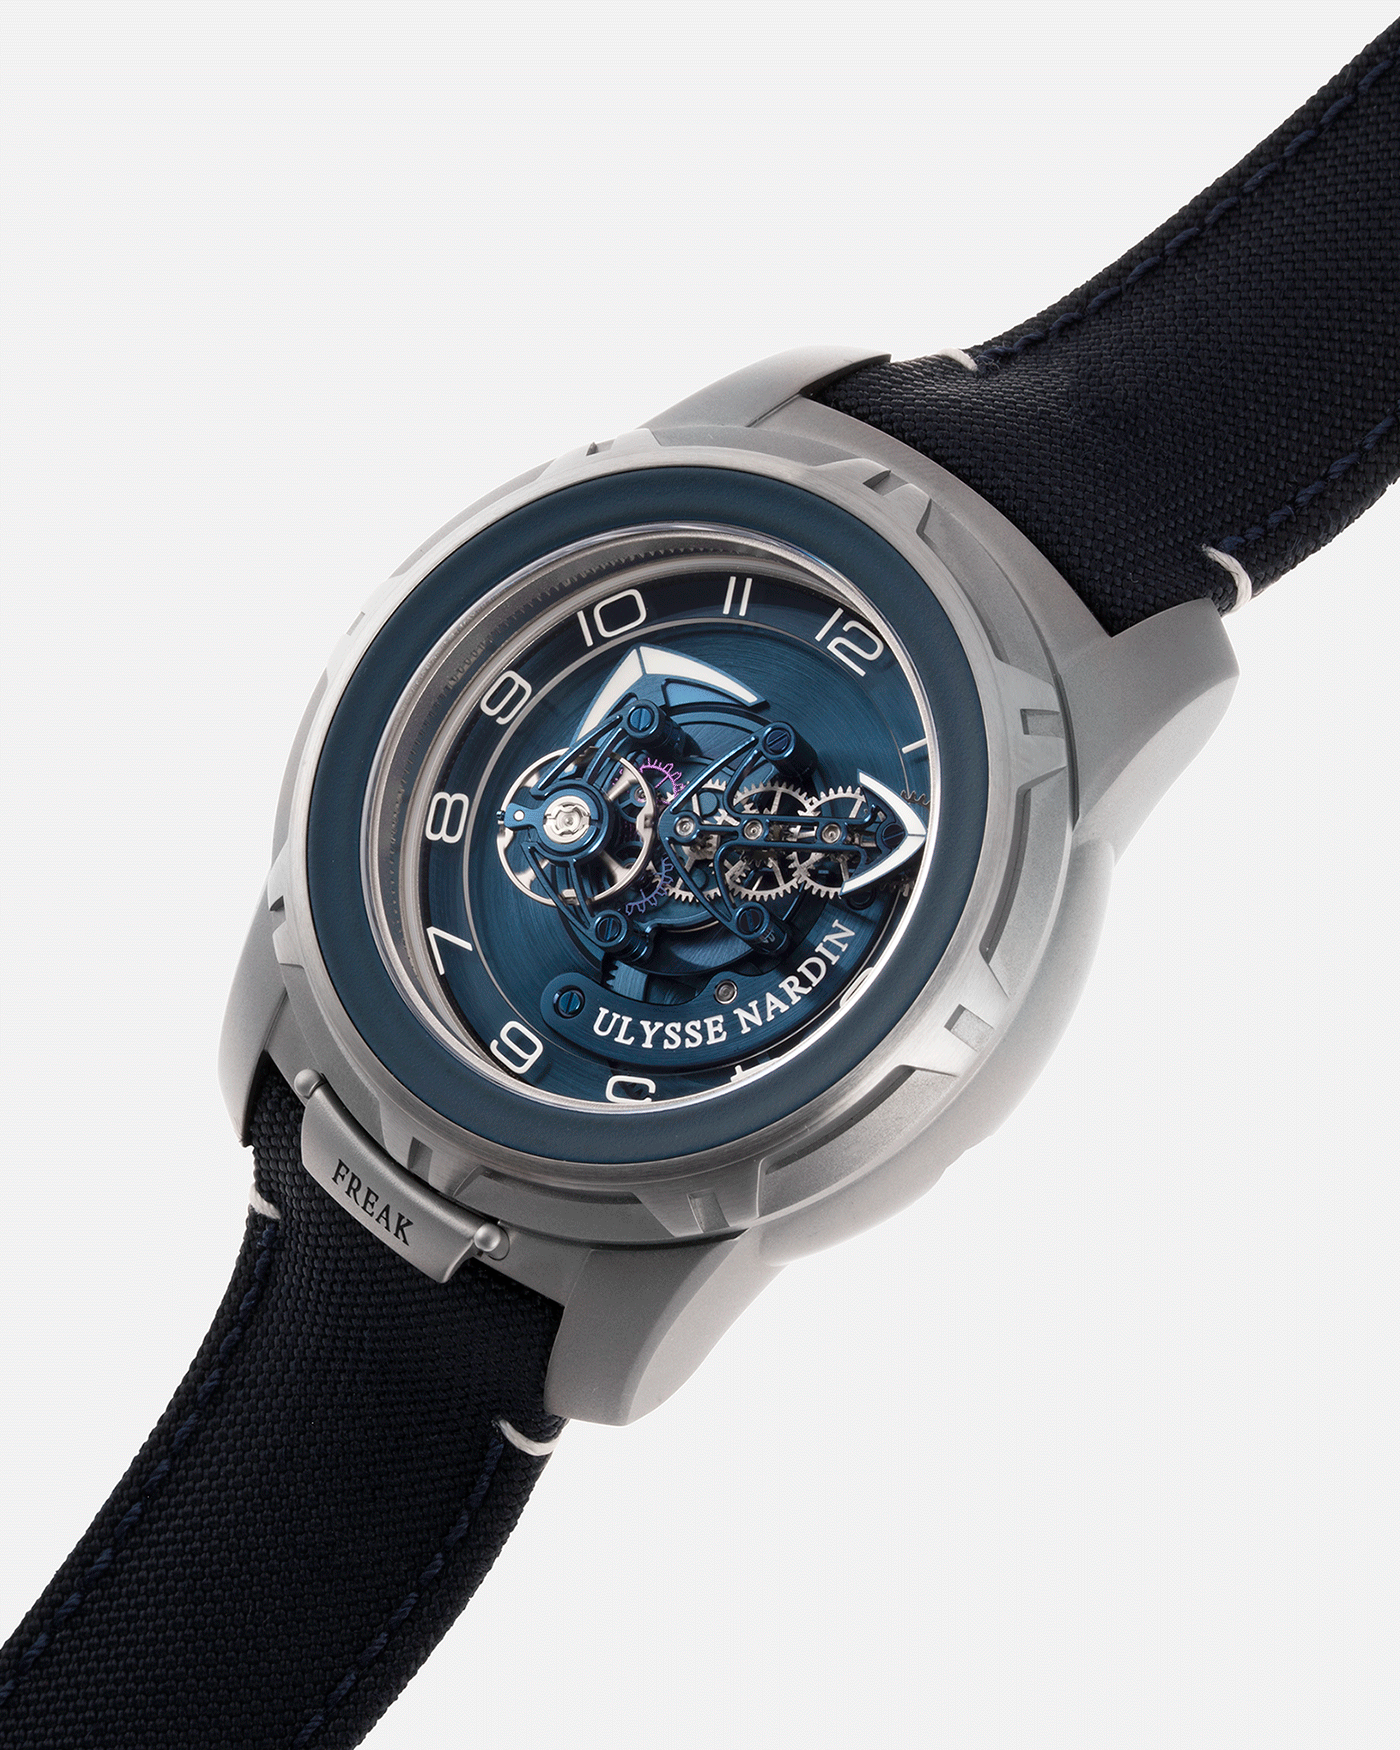 Brand: Ulysse Nardin Year: 2020 Model: Freak Out Reference: DB25 Material: Titanium Movement: In-House Manually-Wound UN-205 Case Diameter: 45mm Strap: Ulysse Nardin Blue Leather-Backed Textile Strap with Titanium Deployant